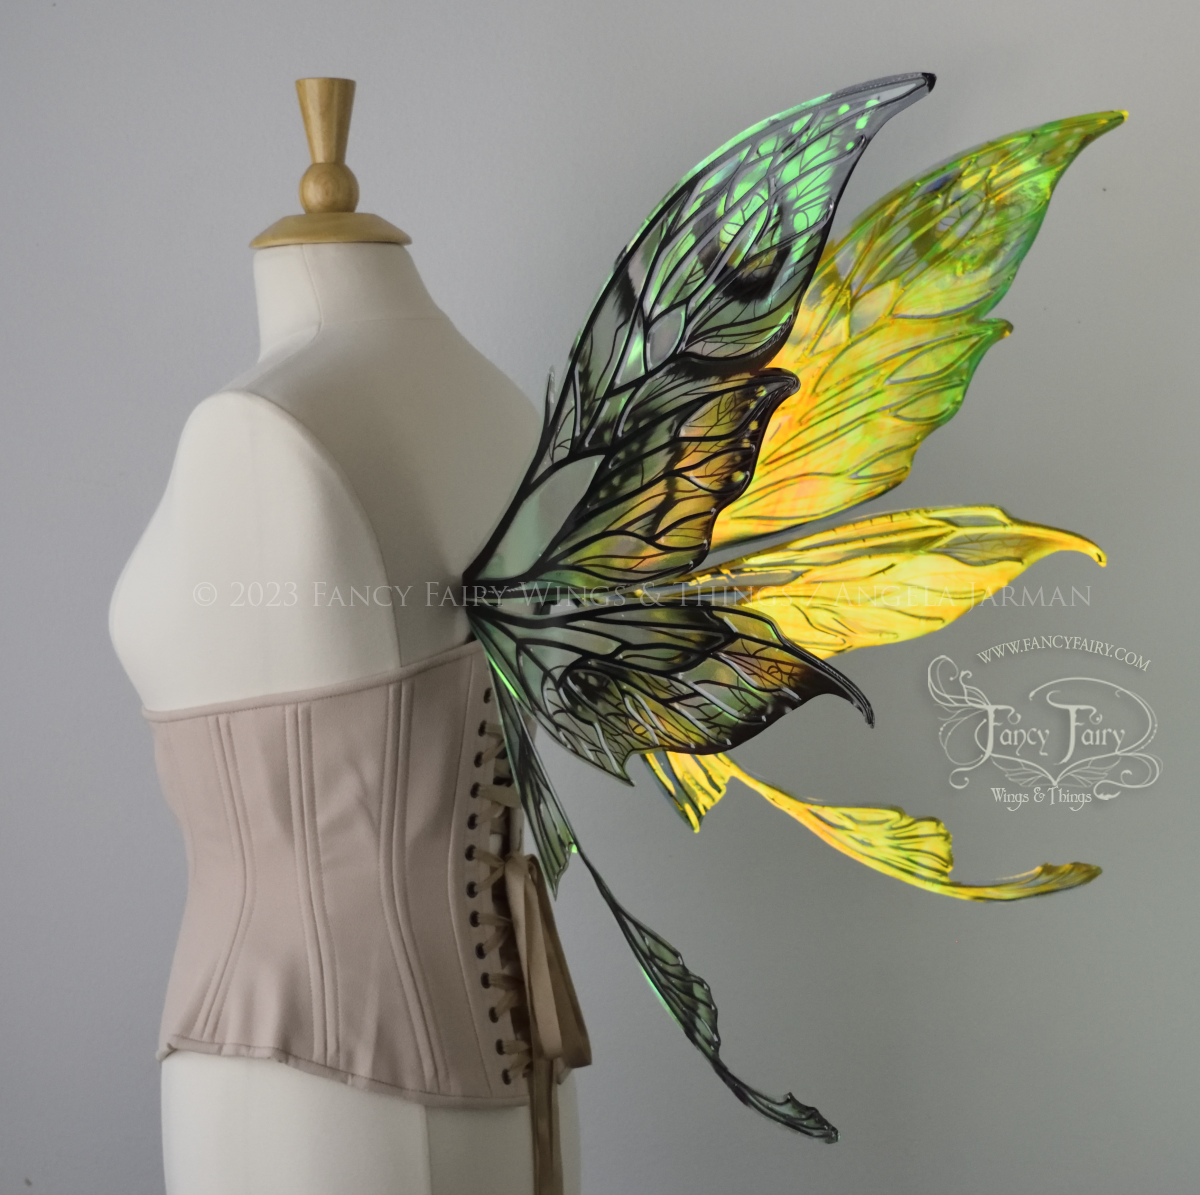 3/4 back view of large green, gold & black painted iridescent fairy wings with black veins. Upper panels are elongated with pointed tips, a ‘tail’, lots of vein detail